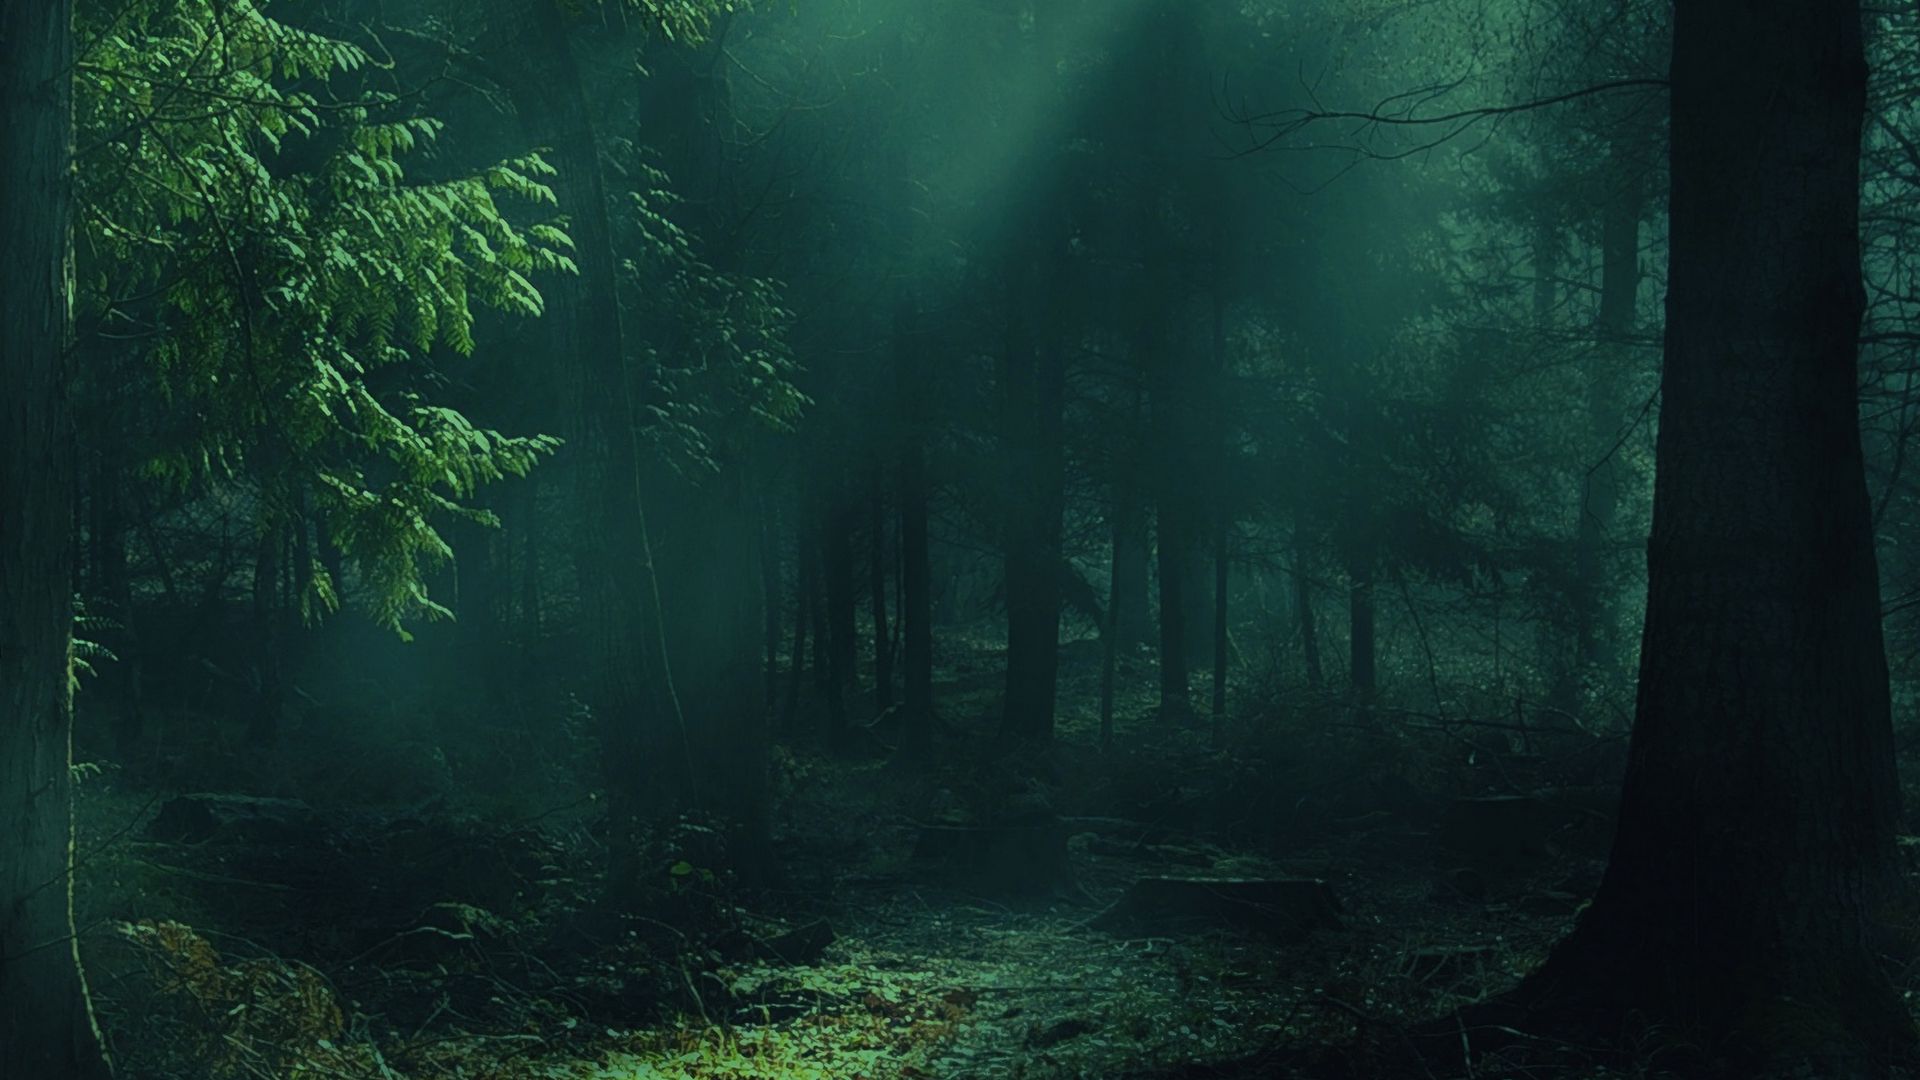 Download wallpaper 1920x1080 forest, fog, trees, shadows ...